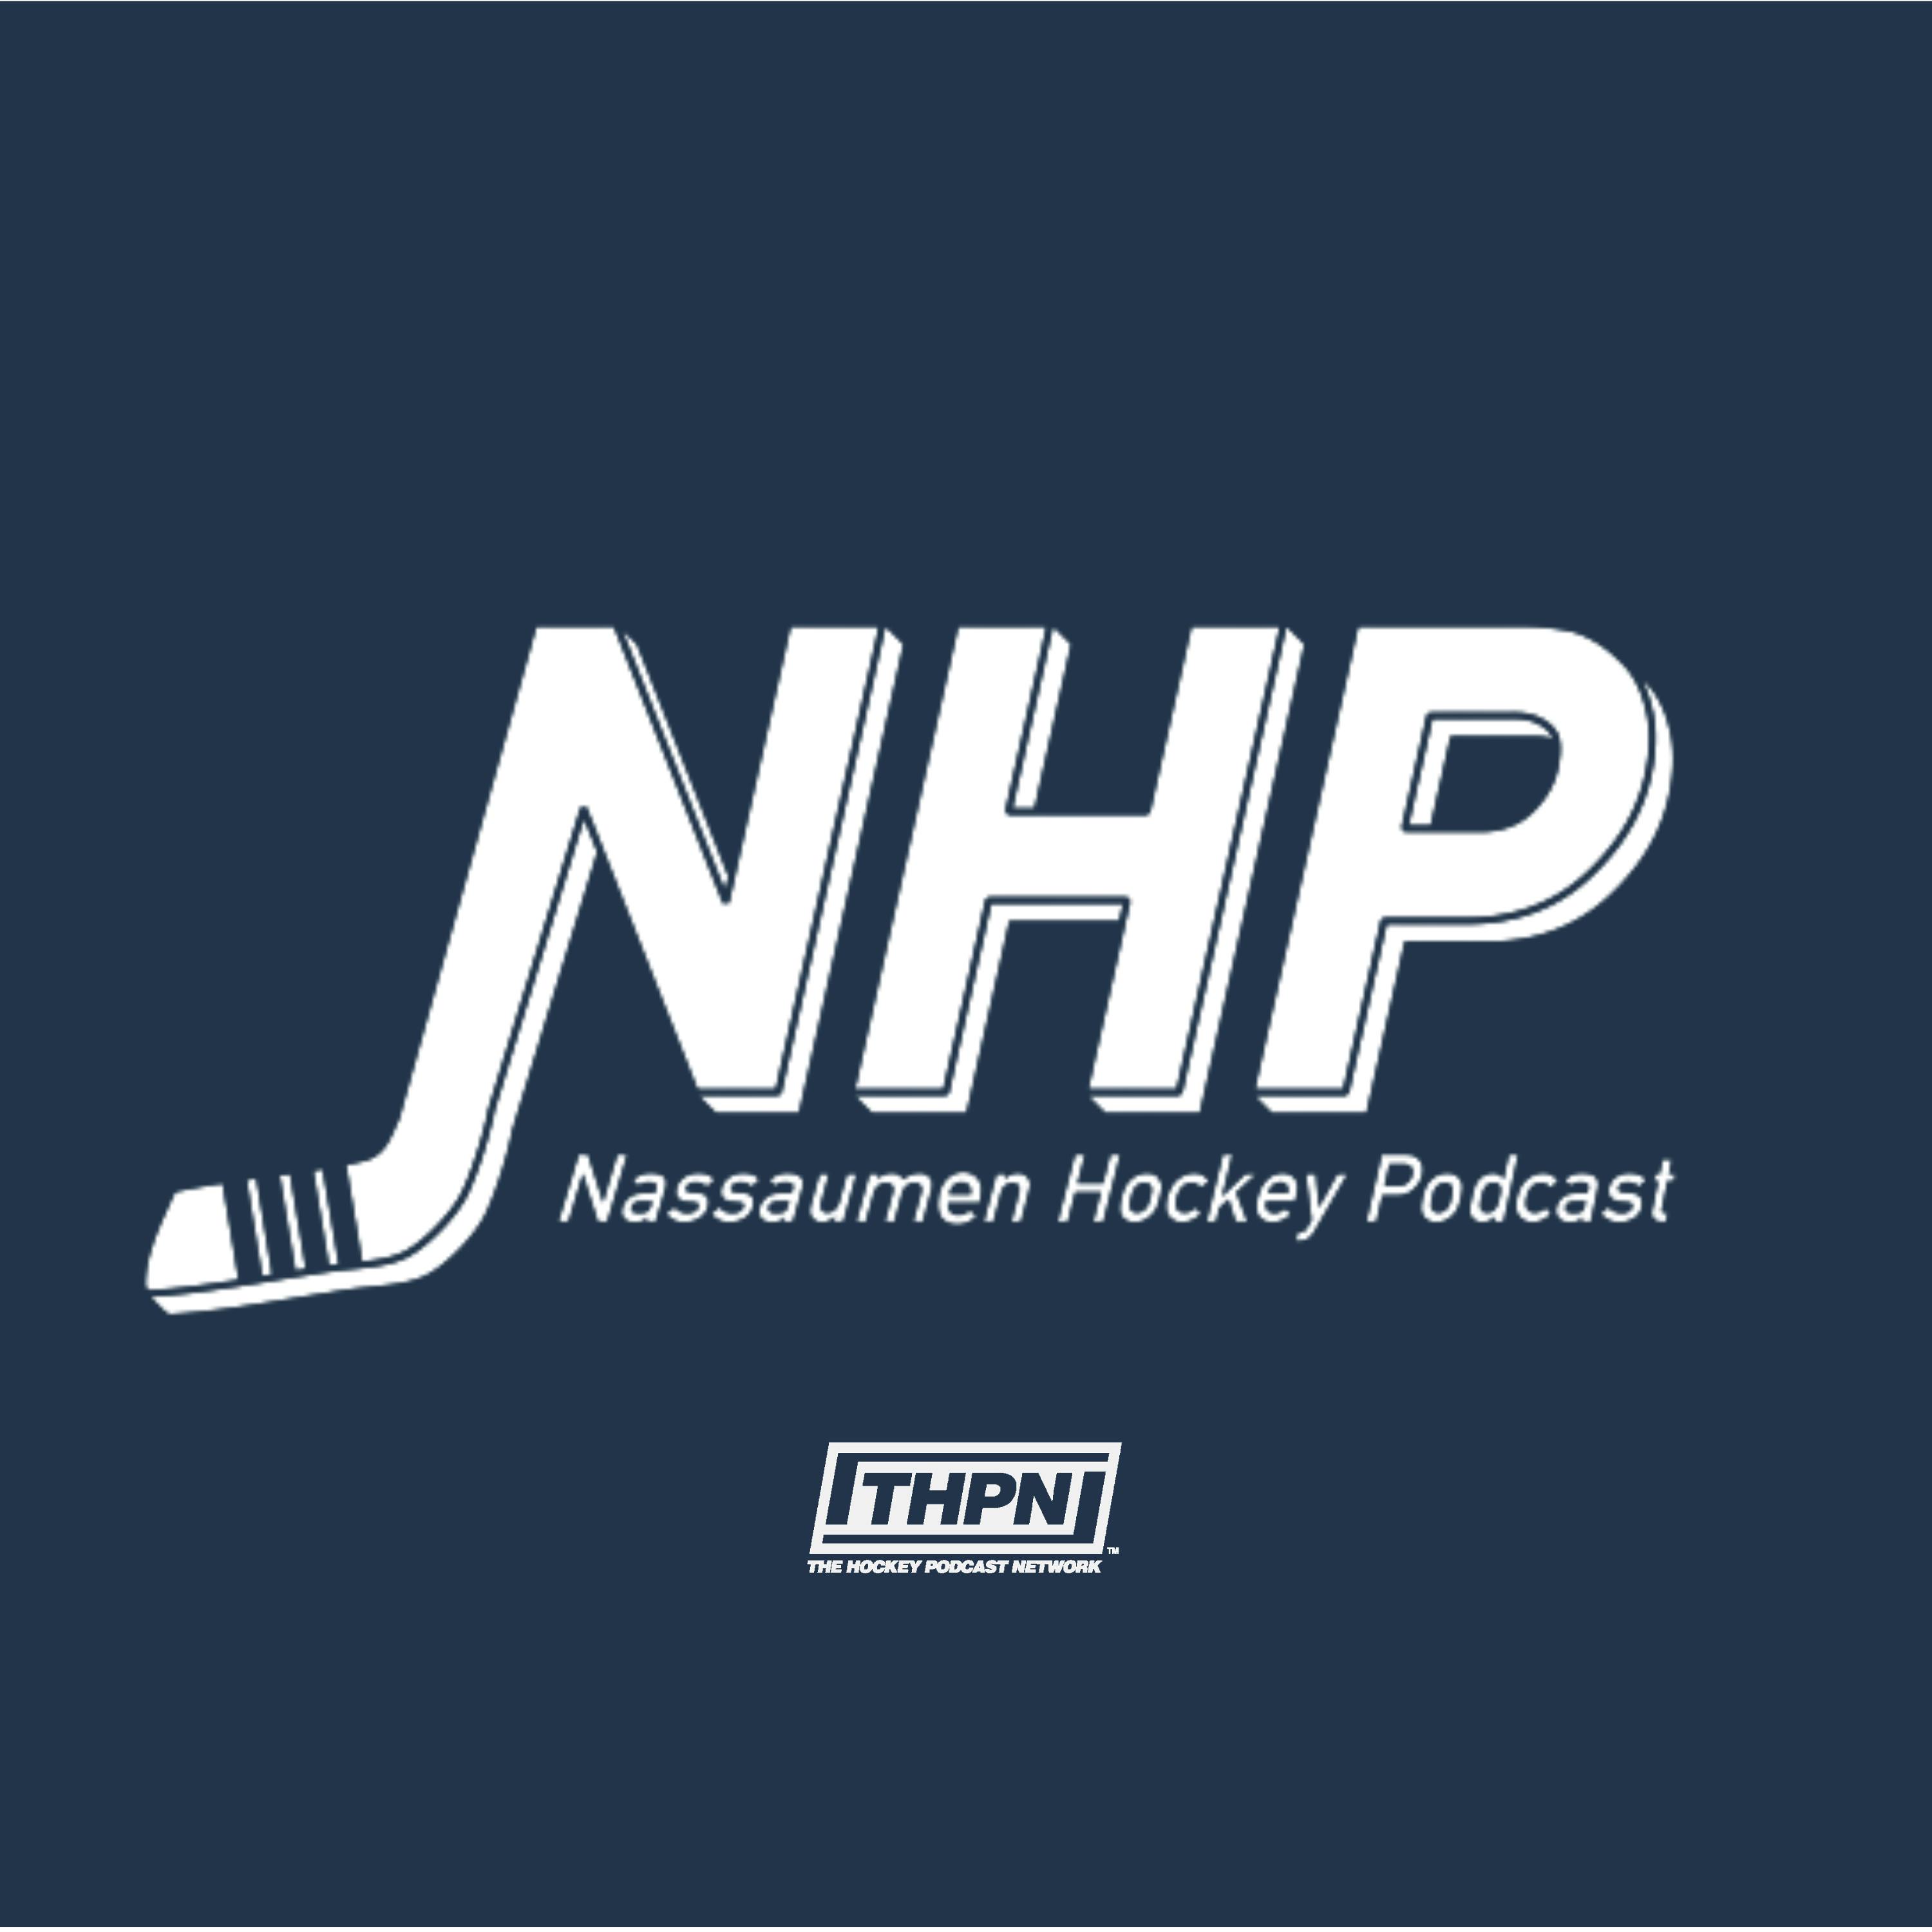 Episode 171 - Trust, but Verify: Have the Islanders Turned a Corner?